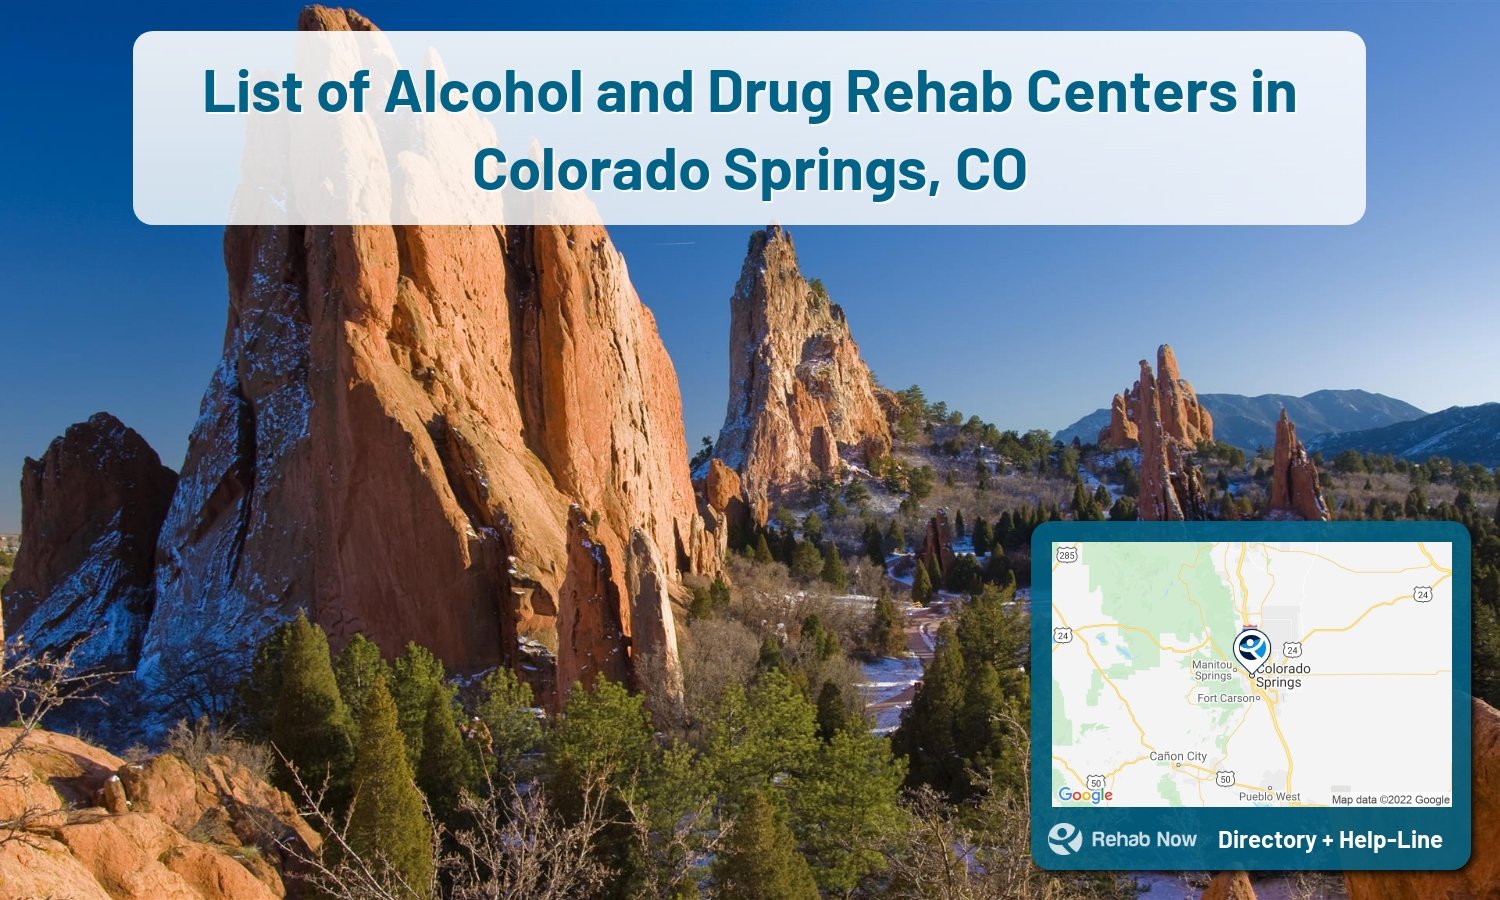 Colorado Springs, CO Treatment Centers. Find drug rehab in Colorado Springs, Colorado, or detox and treatment programs. Get the right help now!